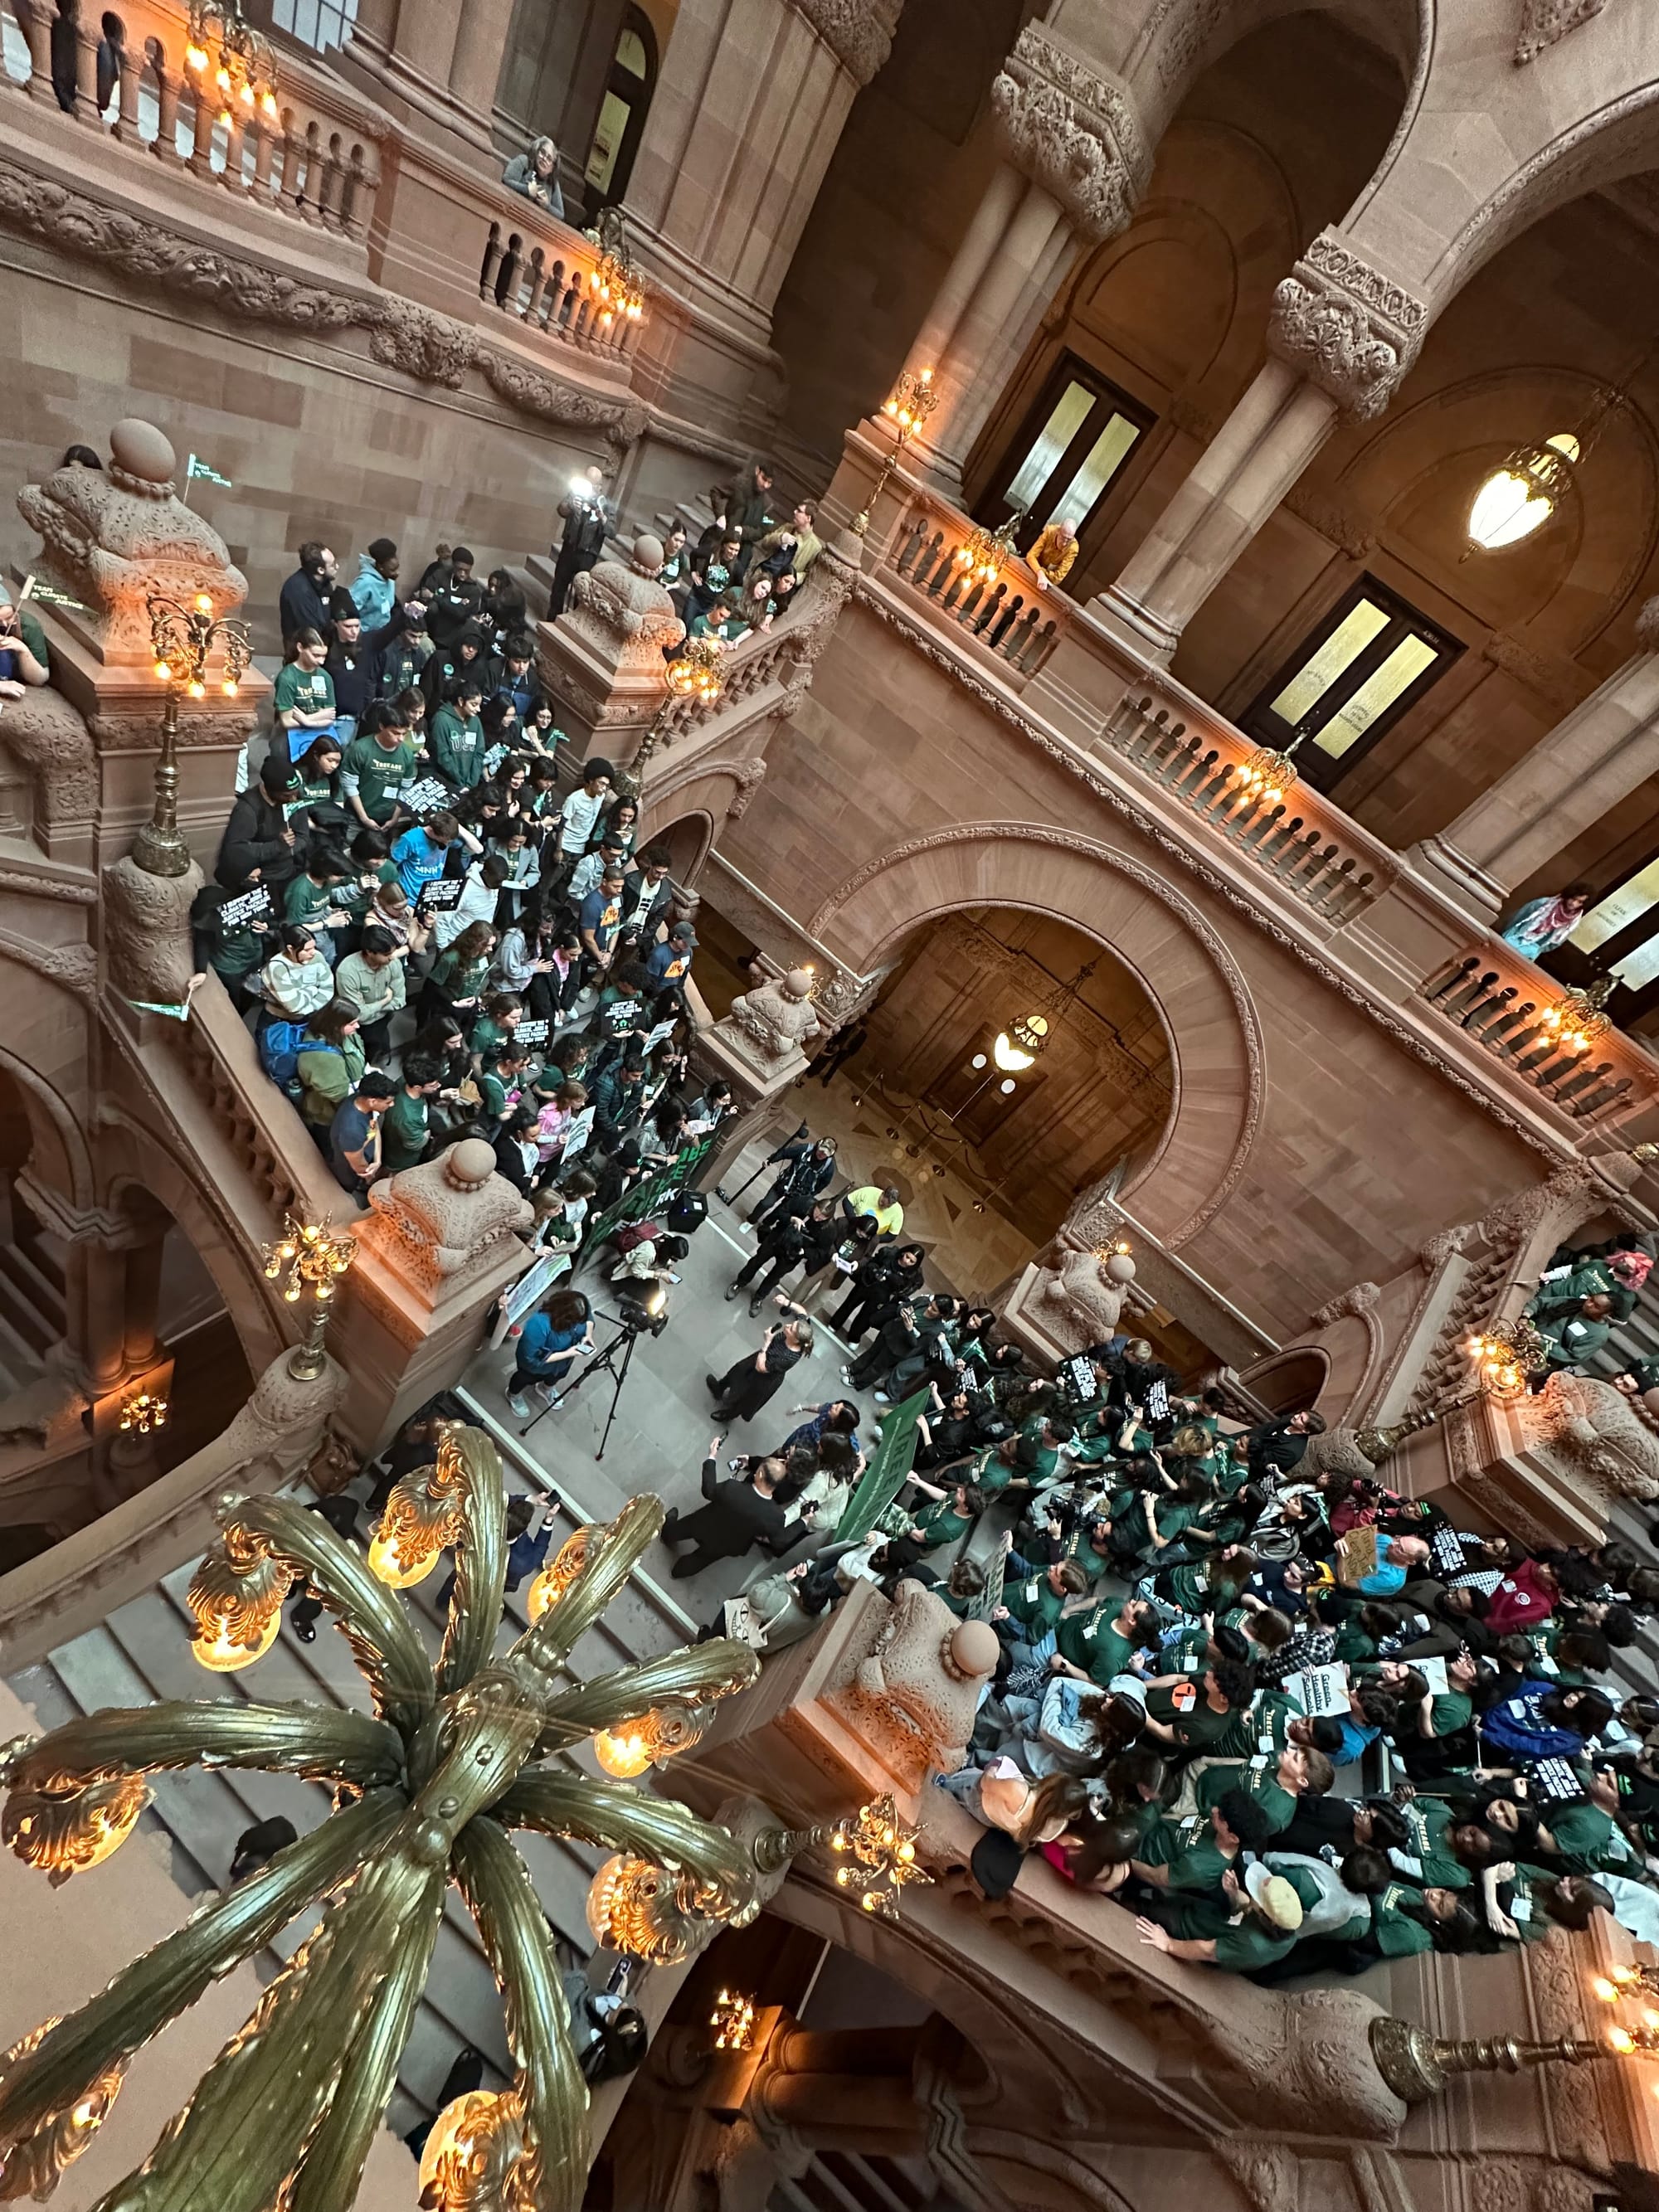 350+ students in the Albany Capital building